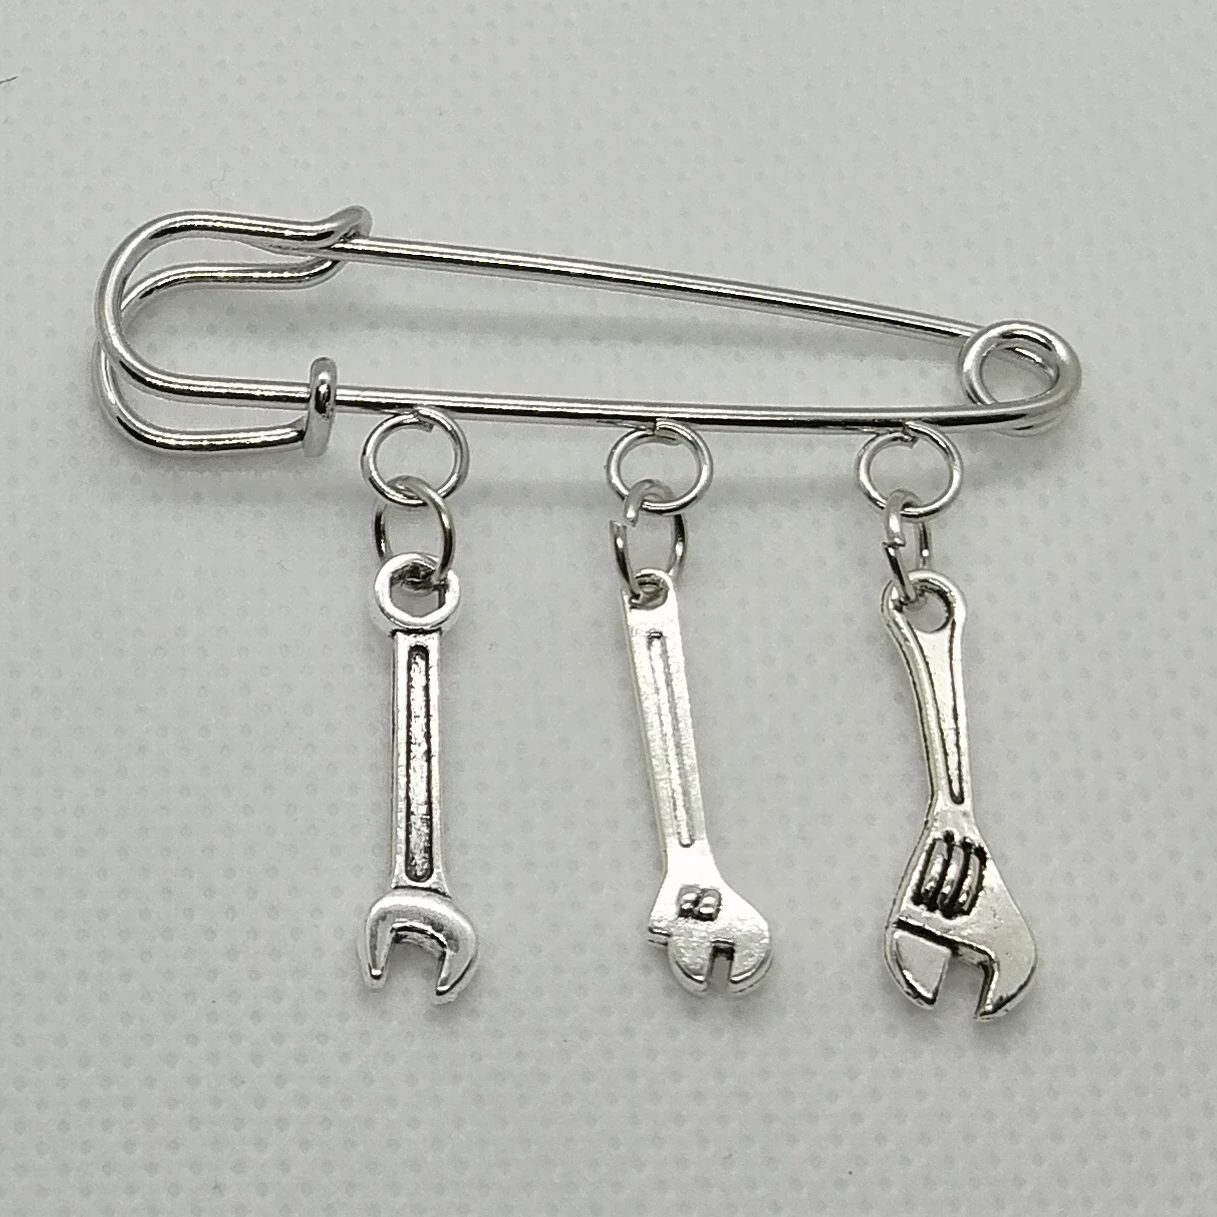 Alloy brooch home improvement tool brooch wrench brooch to send friends gifts beautiful men's brooch